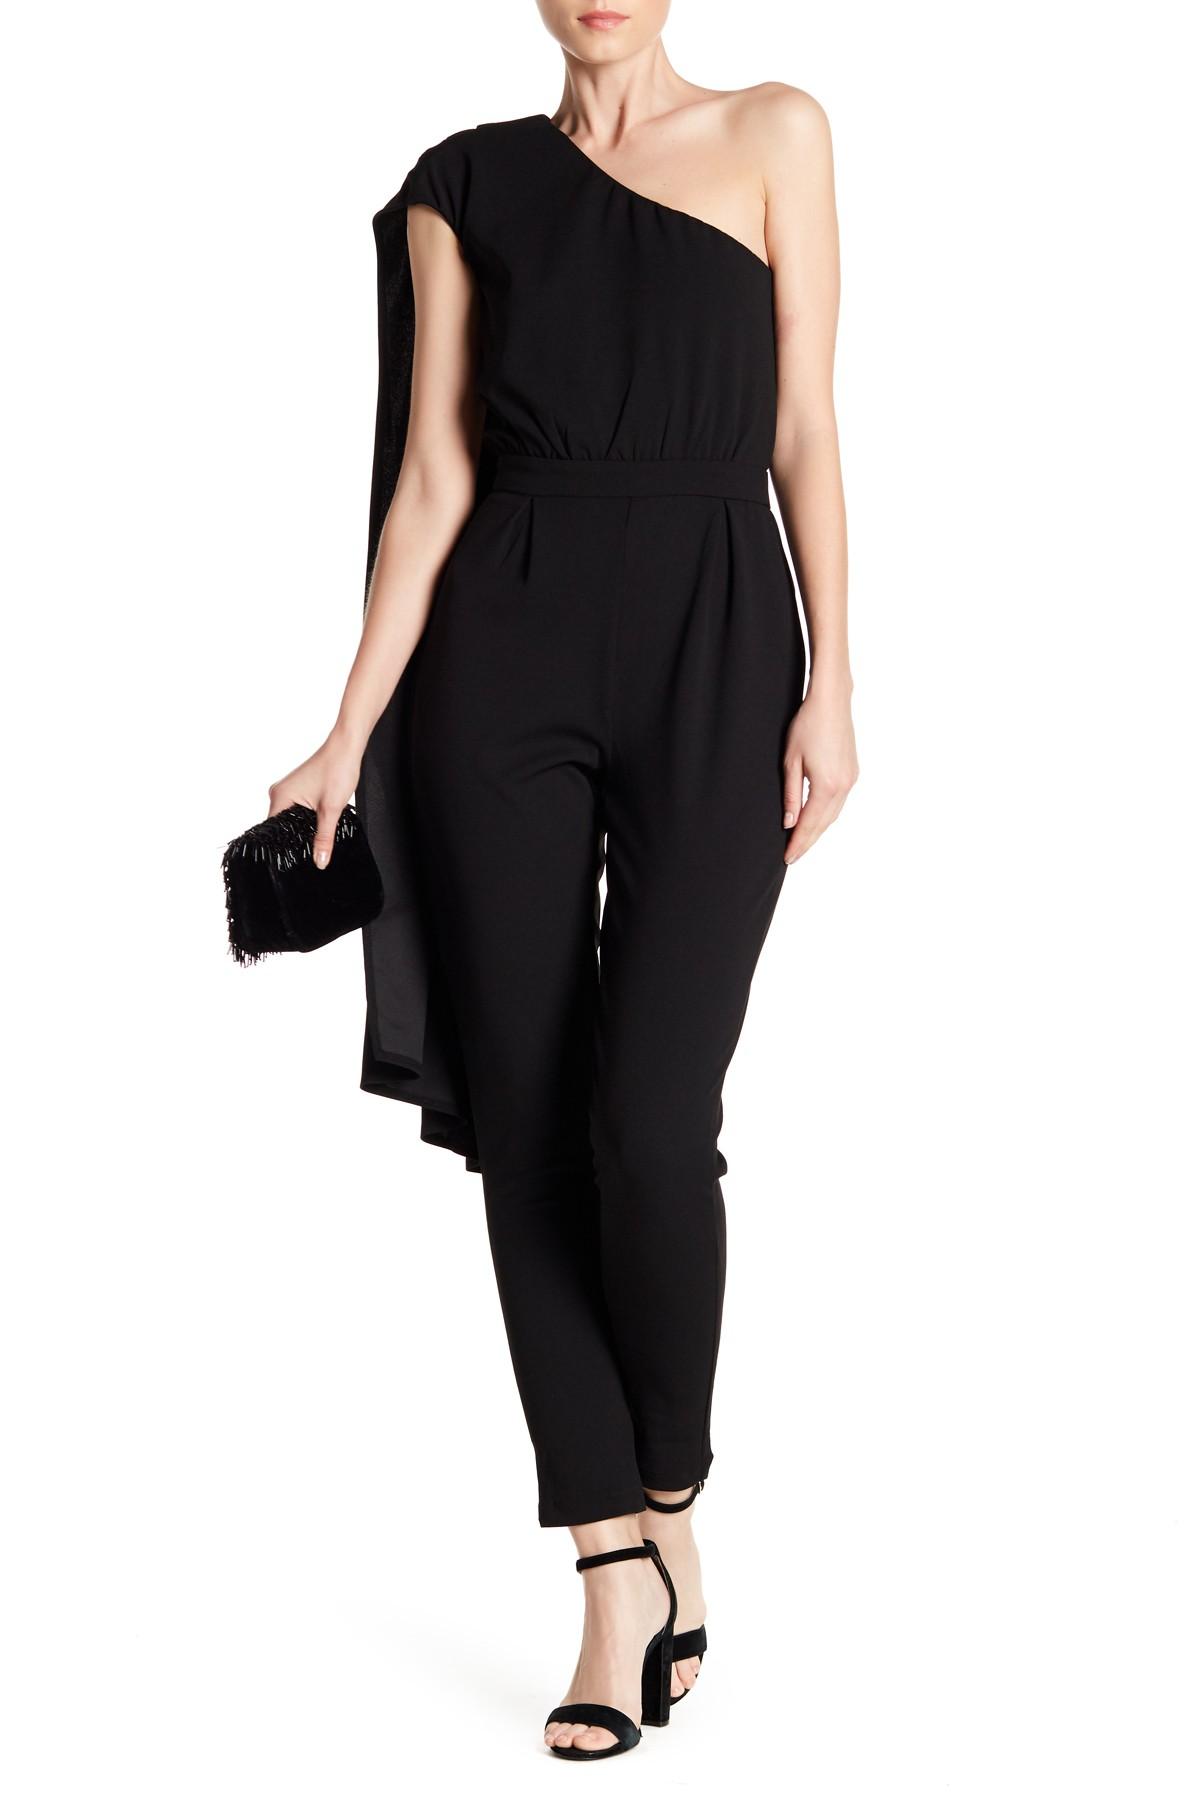 Alexia Admor Synthetic One-shoulder Cape Back Jumpsuit in Black - Lyst